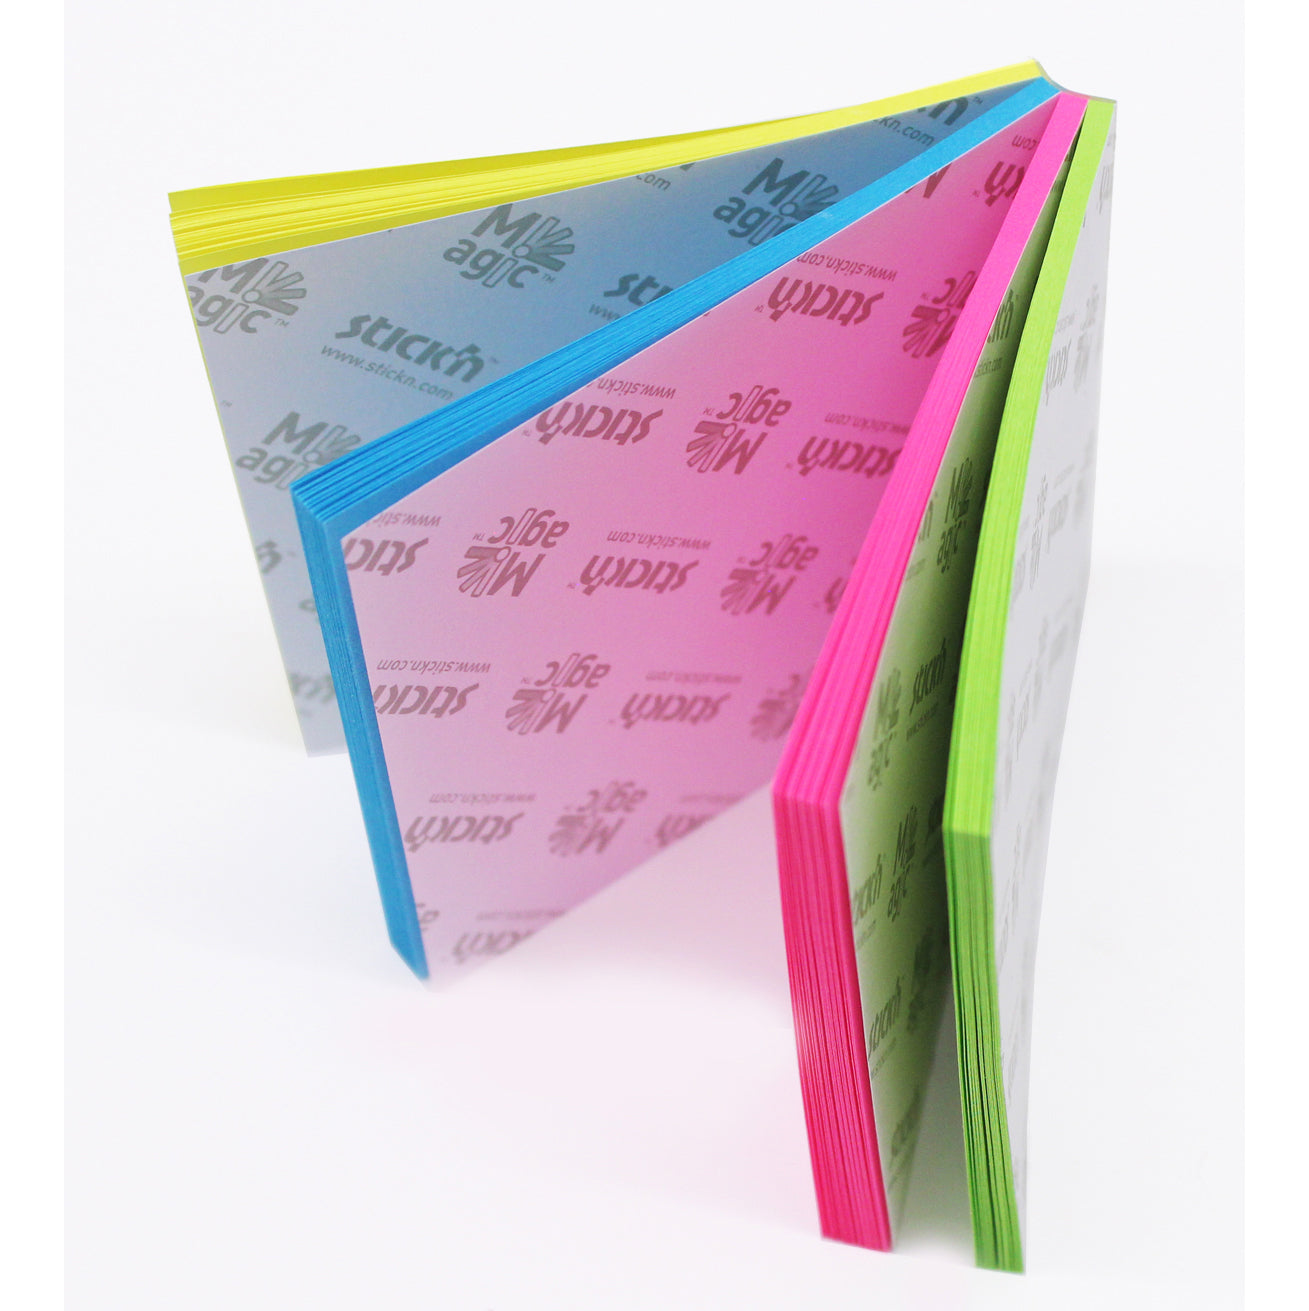 A fanned out Stick'n Notes Magic Pad showing four different neon colours: yellow, blue, pink, and green. Each colour has the Stick'n logo and 'Magic' printed repeatedly on the separator. The product indicates a versatile and colourful option for organizing notes.